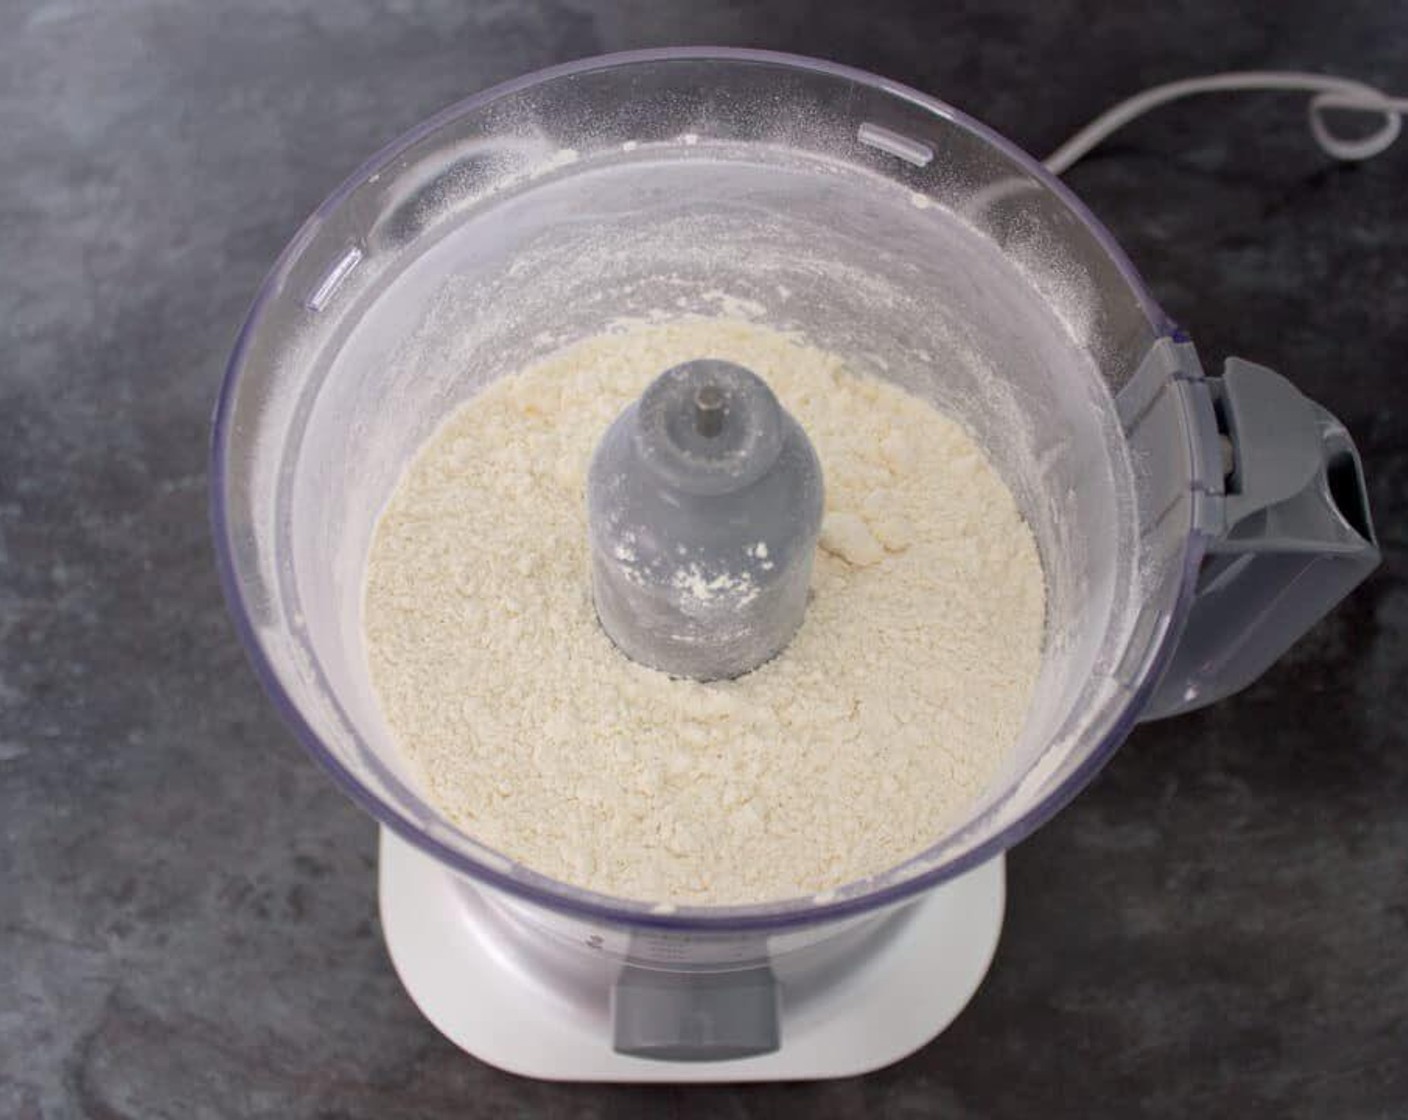 step 1 To make the pastry, dump All-Purpose Flour (2 cups), Unsalted Butter (1/2 cup), and Salt (1 pinch) into a food processor & blitz until it becomes fine breadcrumbs.